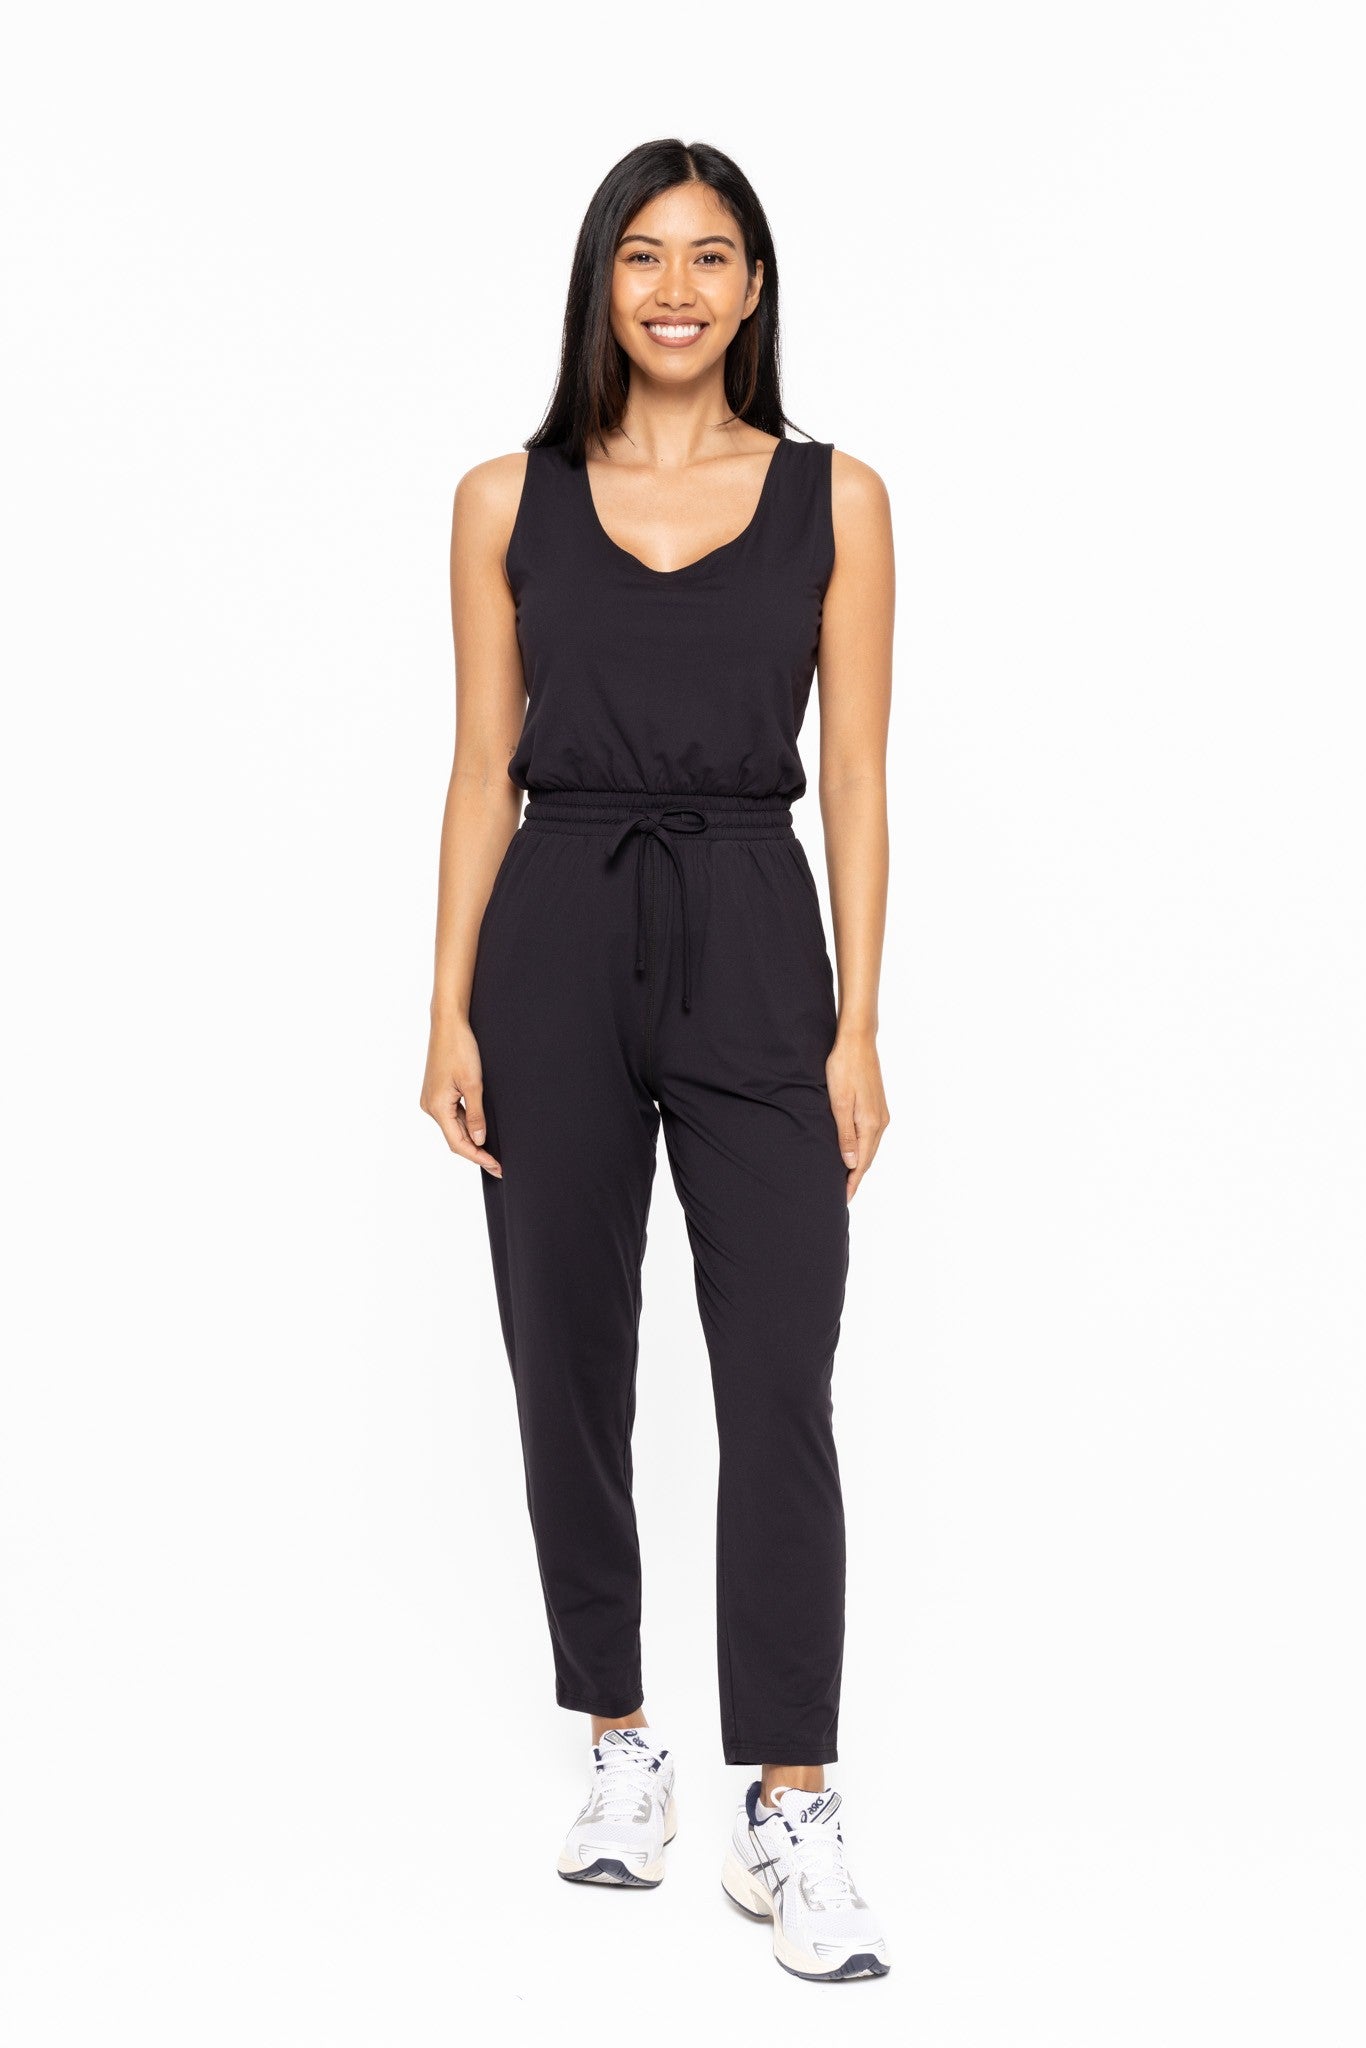 "Give Me More" Jumpsuit